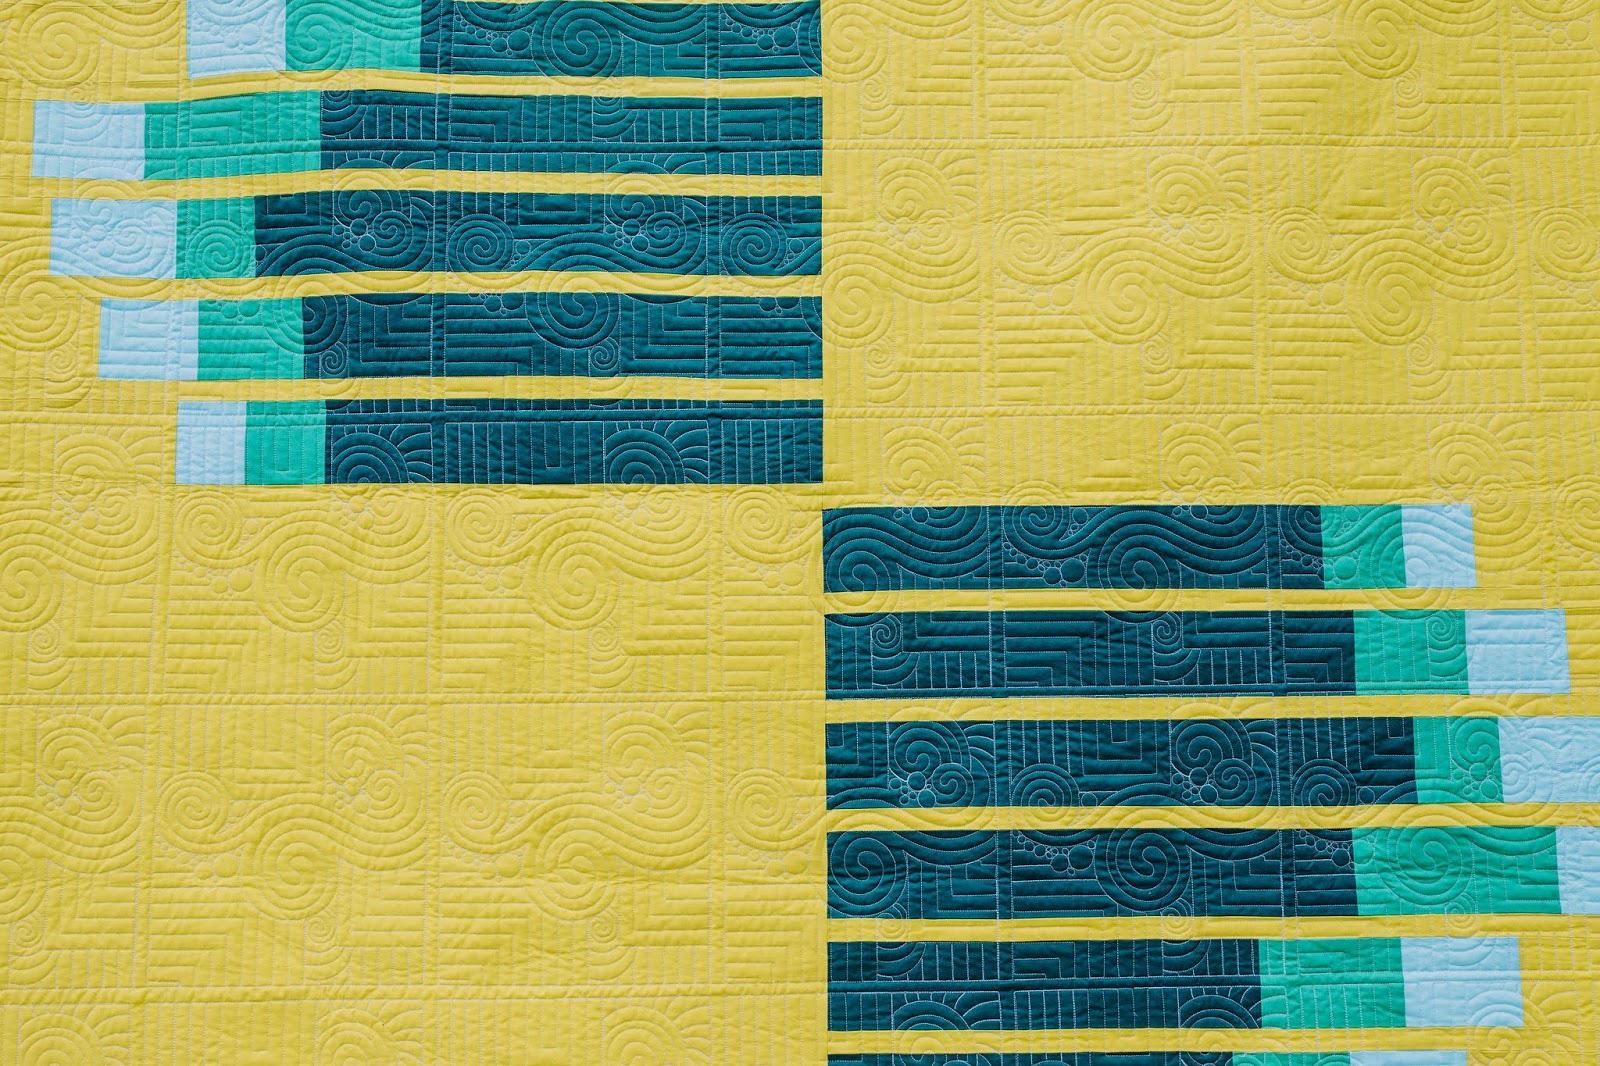 Signal Quilt Pattern Now Available Through the Modern Quilt Guild